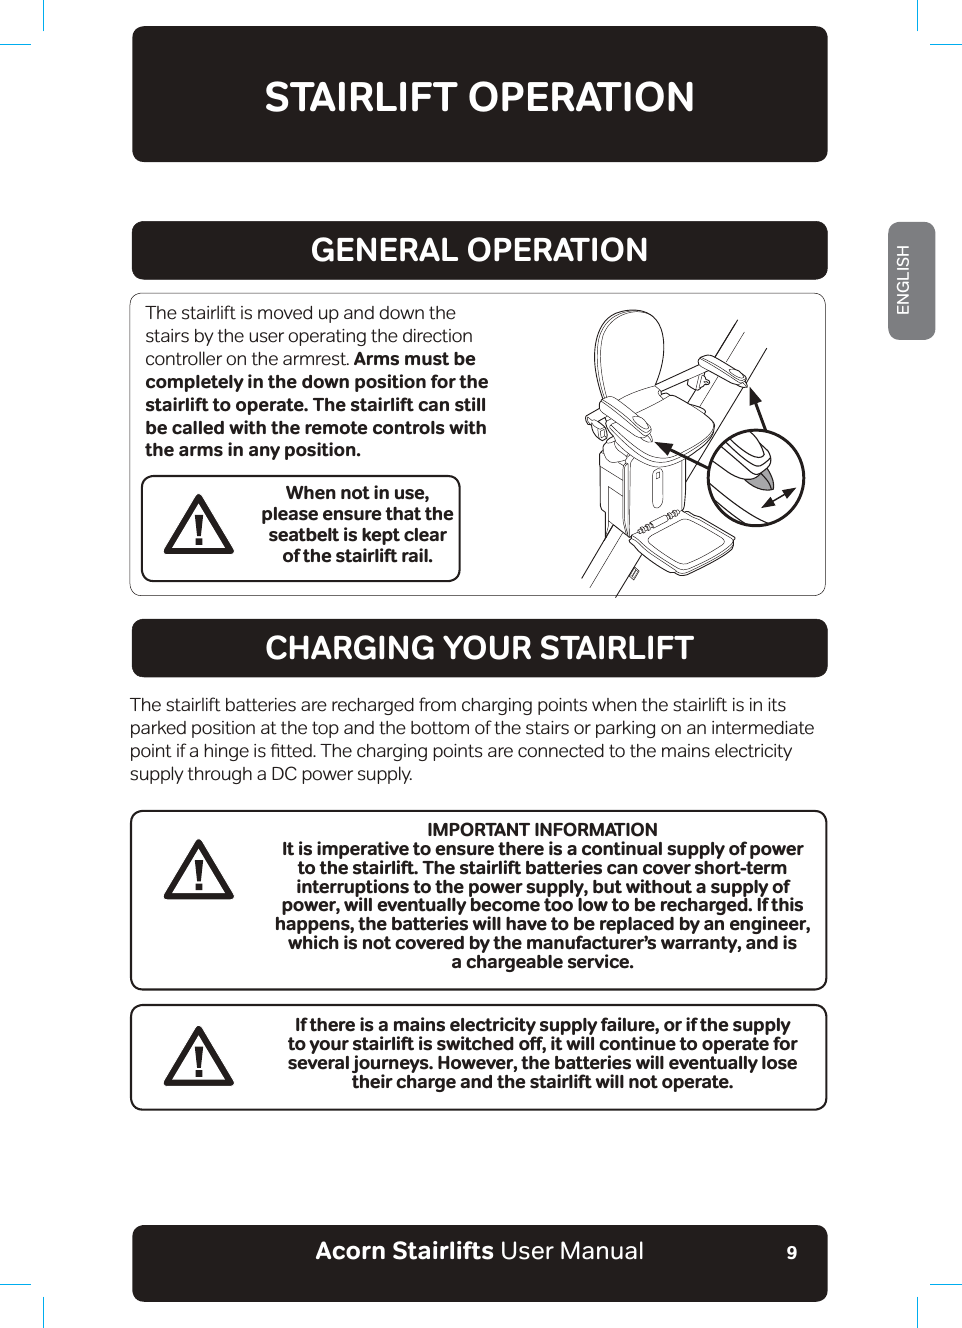 Acorn Stairlifts User ManualENGLISH9STAIRLIFT OPERATIONGENERAL OPERATIONCHARGING YOUR STAIRLIFTWhen not in use, please ensure that the seatbelt is kept clear of the stairlift rail.The stairlift is moved up and down the stairs by the user operating the direction controller on the armrest. Arms must be completely in the down position for the stairlift to operate. The stairlift can still be called with the remote controls with the arms in any position.The stairlift batteries are recharged from charging points when the stairlift is in its parked position at the top and the bottom of the stairs or parking on an intermediate SRLQWLIDKLQJHLVƷWWHG7KHFKDUJLQJSRLQWVDUHFRQQHFWHGWRWKHPDLQVHOHFWULFLW\supply through a DC power supply.If there is a mains electricity supply failure, or if the supply VQ[QWTUVCKTNKHVKUUYKVEJGFQƴǊKVYKNNEQPVKPWGVQQRGTCVGHQTseveral journeys. However, the batteries will eventually lose their charge and the stairlift will not operate.IMPORTANT INFORMATIONIt is imperative to ensure there is a continual supply of power to the stairlift. The stairlift batteries can cover short-term interruptions to the power supply, but without a supply of power, will eventually become too low to be recharged. If this happens, the batteries will have to be replaced by an engineer, which is not covered by the manufacturer’s warranty, and is a chargeable service. 